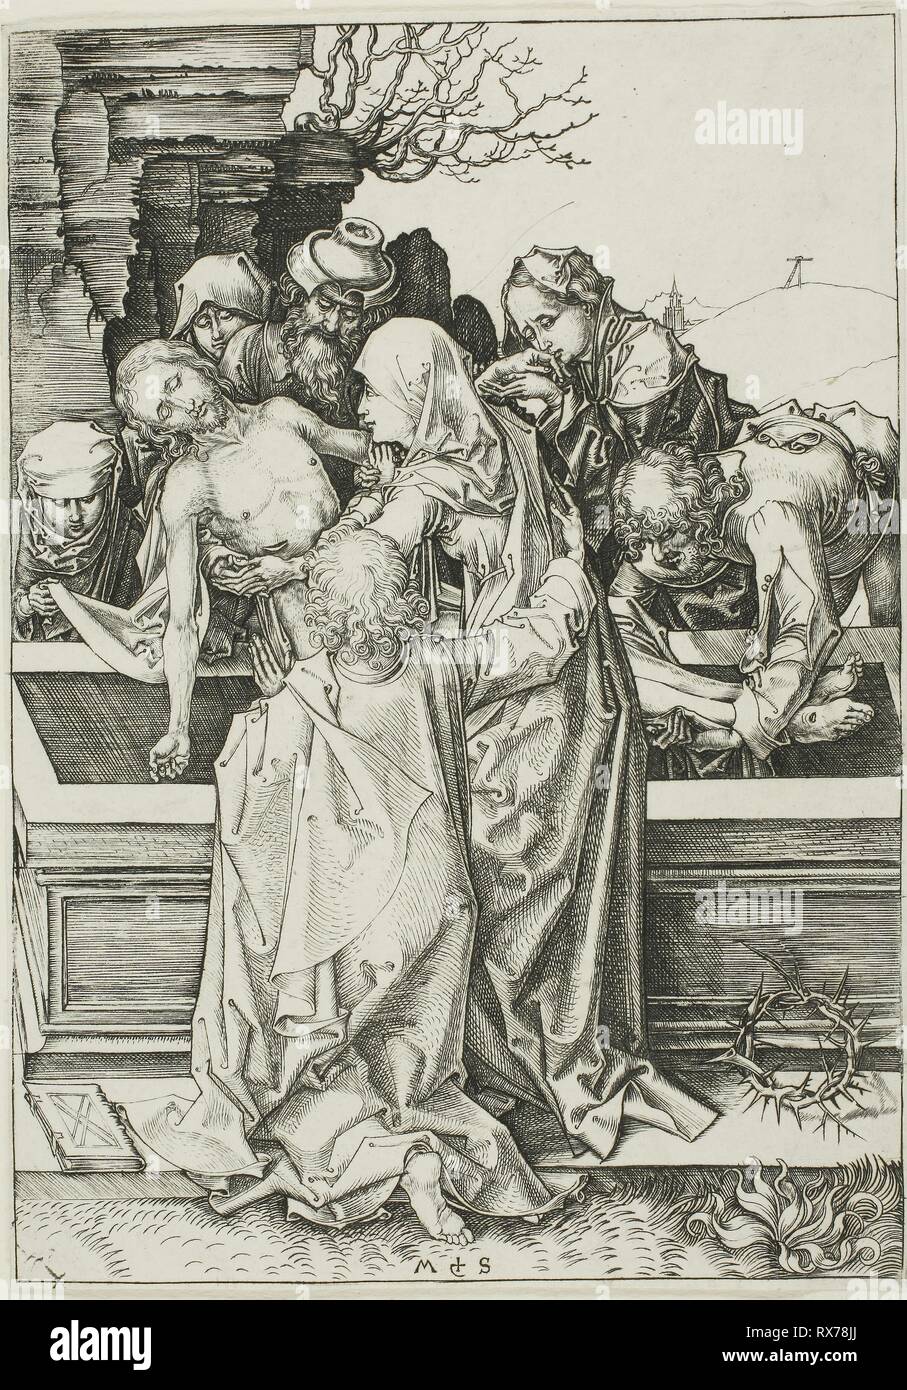 The Entombment. Martin Schongauer; German, c. 1450-1491. Date: 1475-1485. Dimensions: 165 x 115 mm (sheet trimmed within plate mark). Engraving on paper. Origin: Germany. Museum: The Chicago Art Institute. Stock Photo